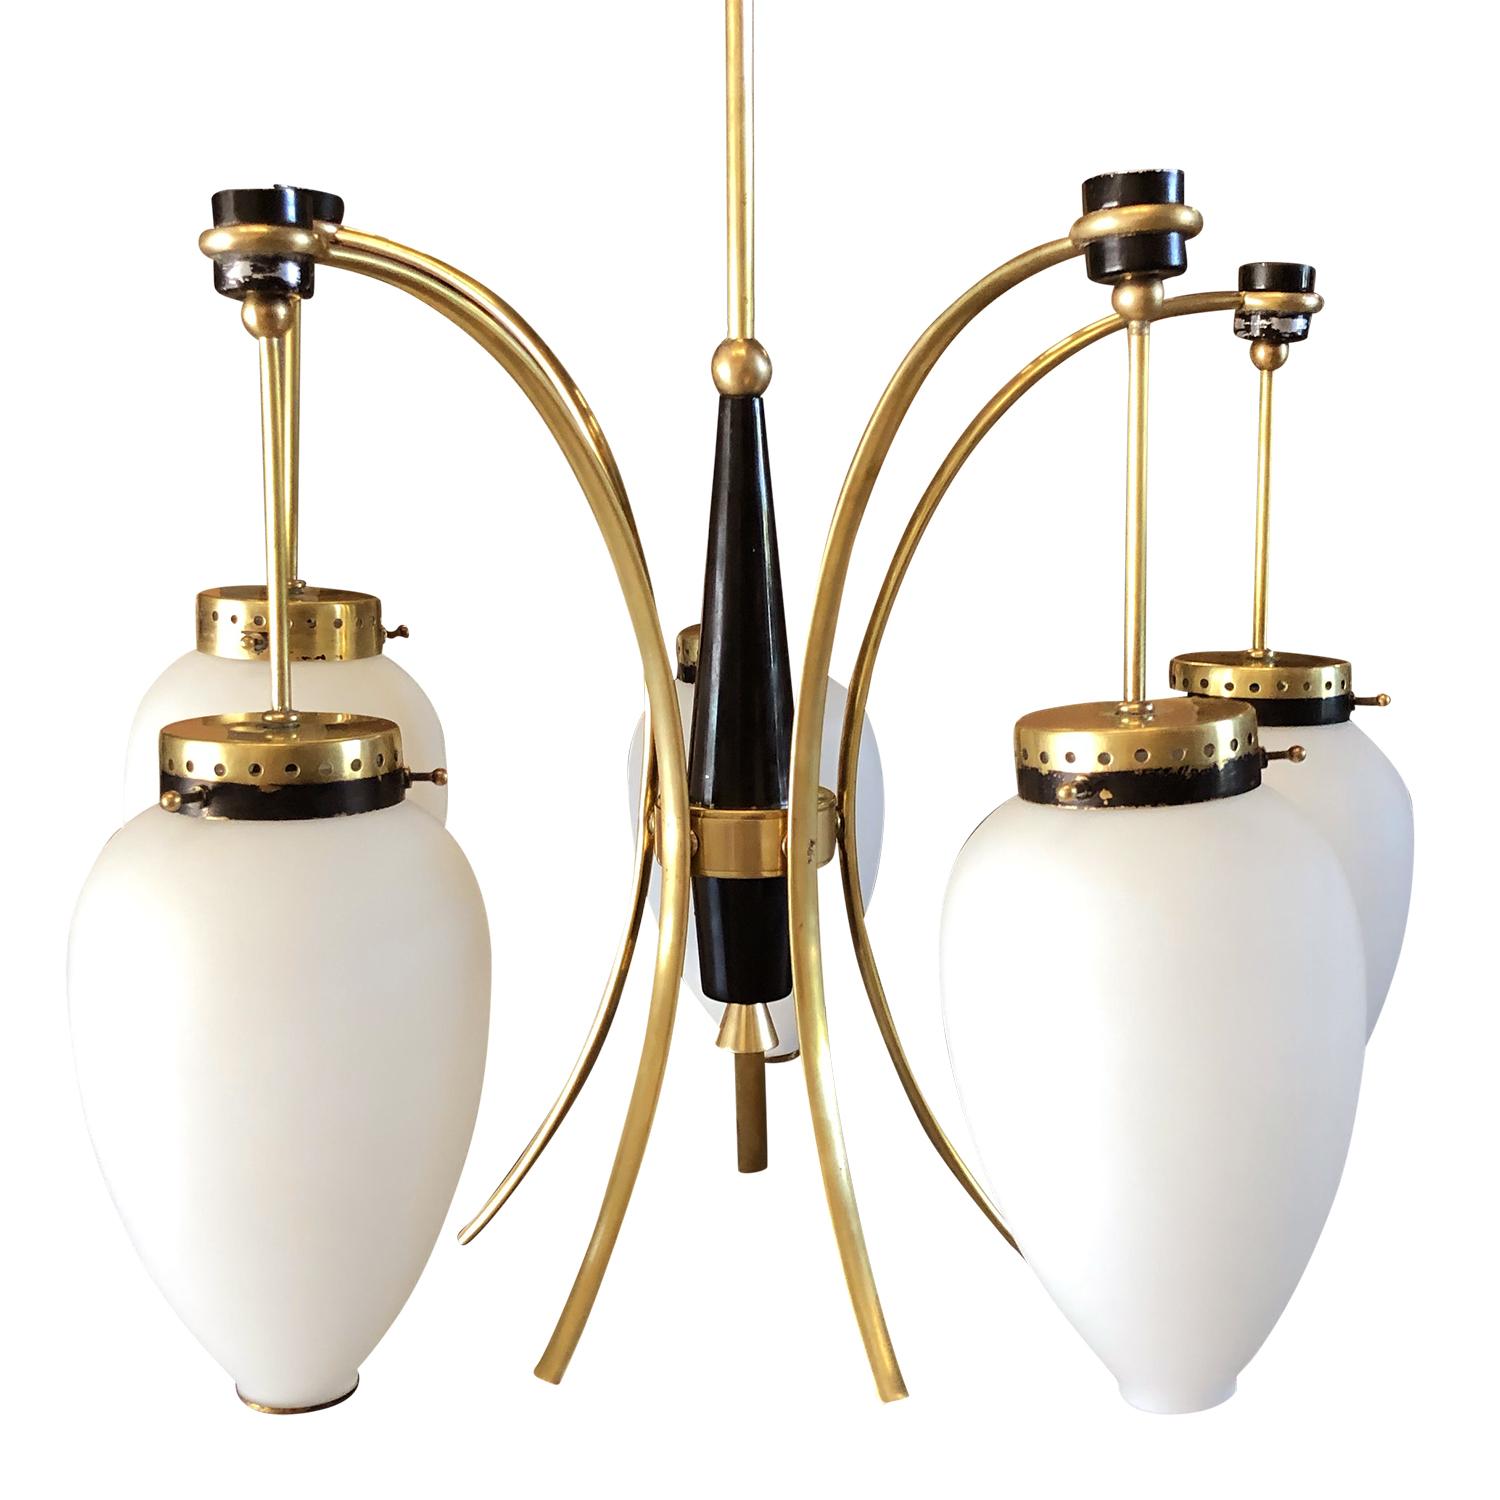 A vintage Mid-Century Modern Italian chandelier, pendant made of hand crafted lacquered metal and brass, having four frosted opaline glass light shades supported by slightly curved brass arms, each of them is featured with a one light socket. The